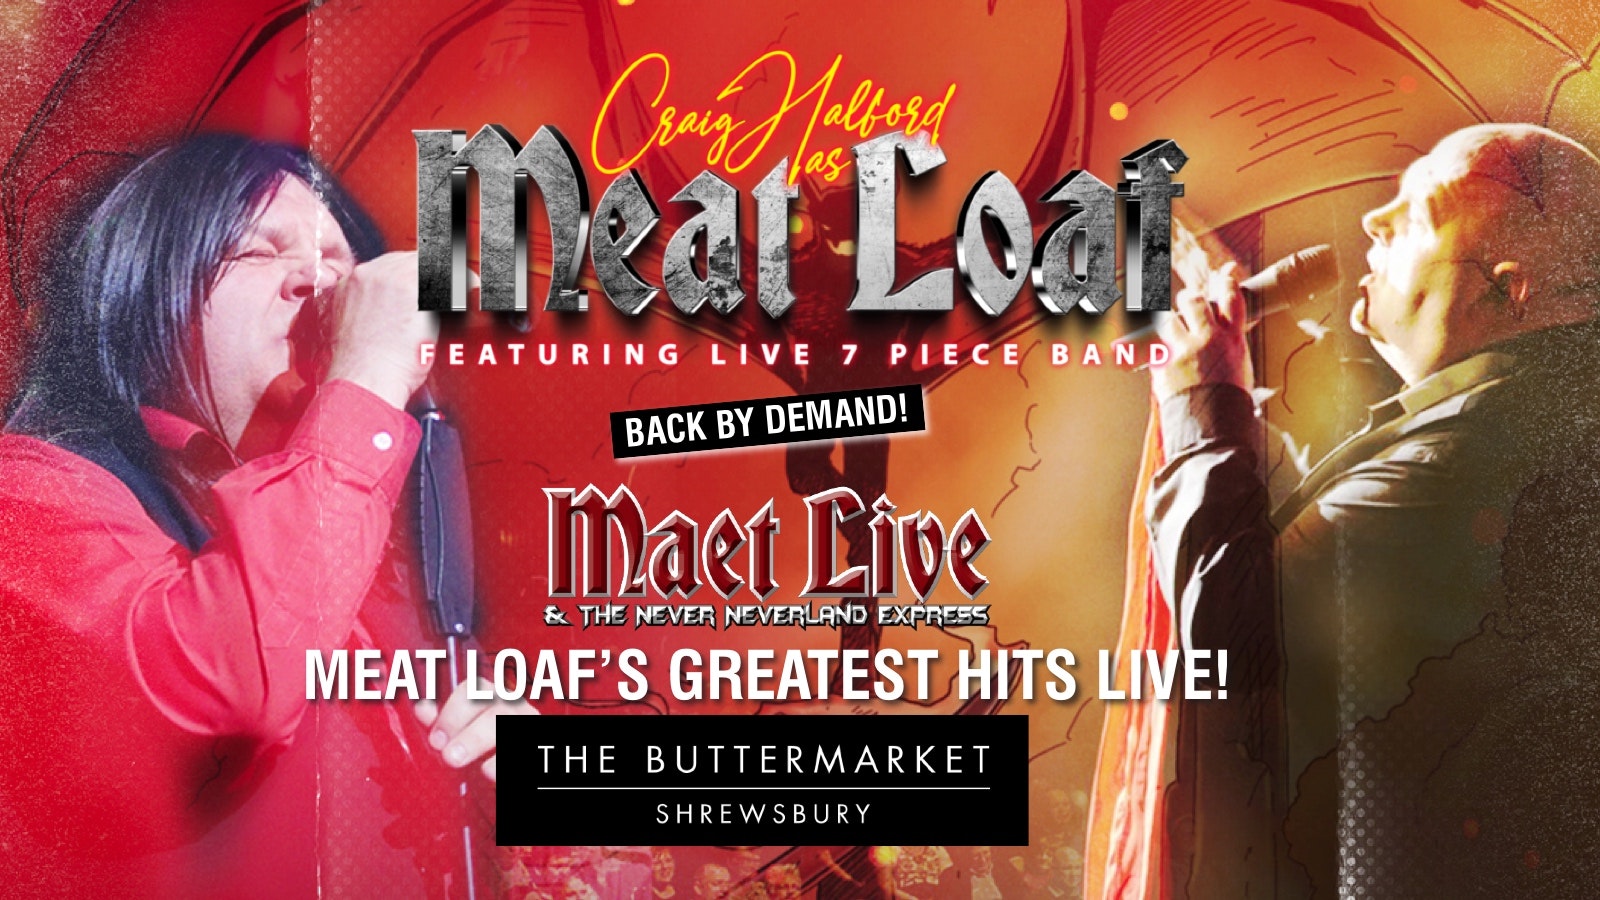 AN EVENING OF MEAT LOAF with Europe’s No.1 tribute Maet Live – ⭐️⭐️⭐️⭐️⭐️ – BACK BY DEMAND